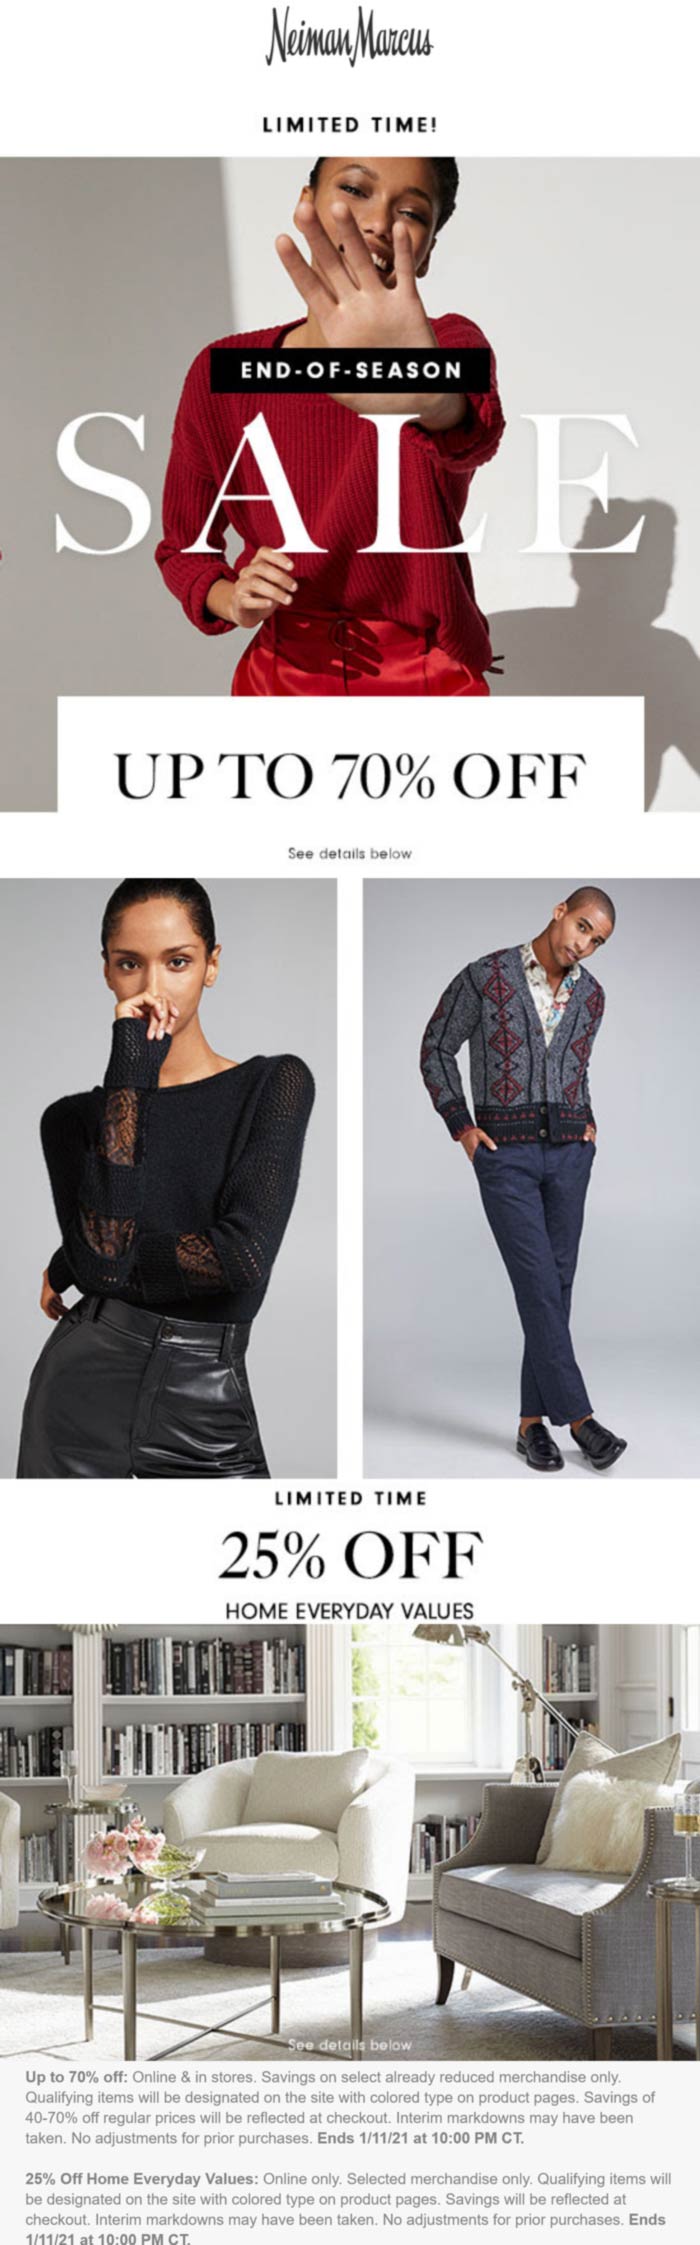 Neiman Marcus stores Coupon  Extra 30% off sale items at Neiman Marcus, ditto online #neimanmarcus 